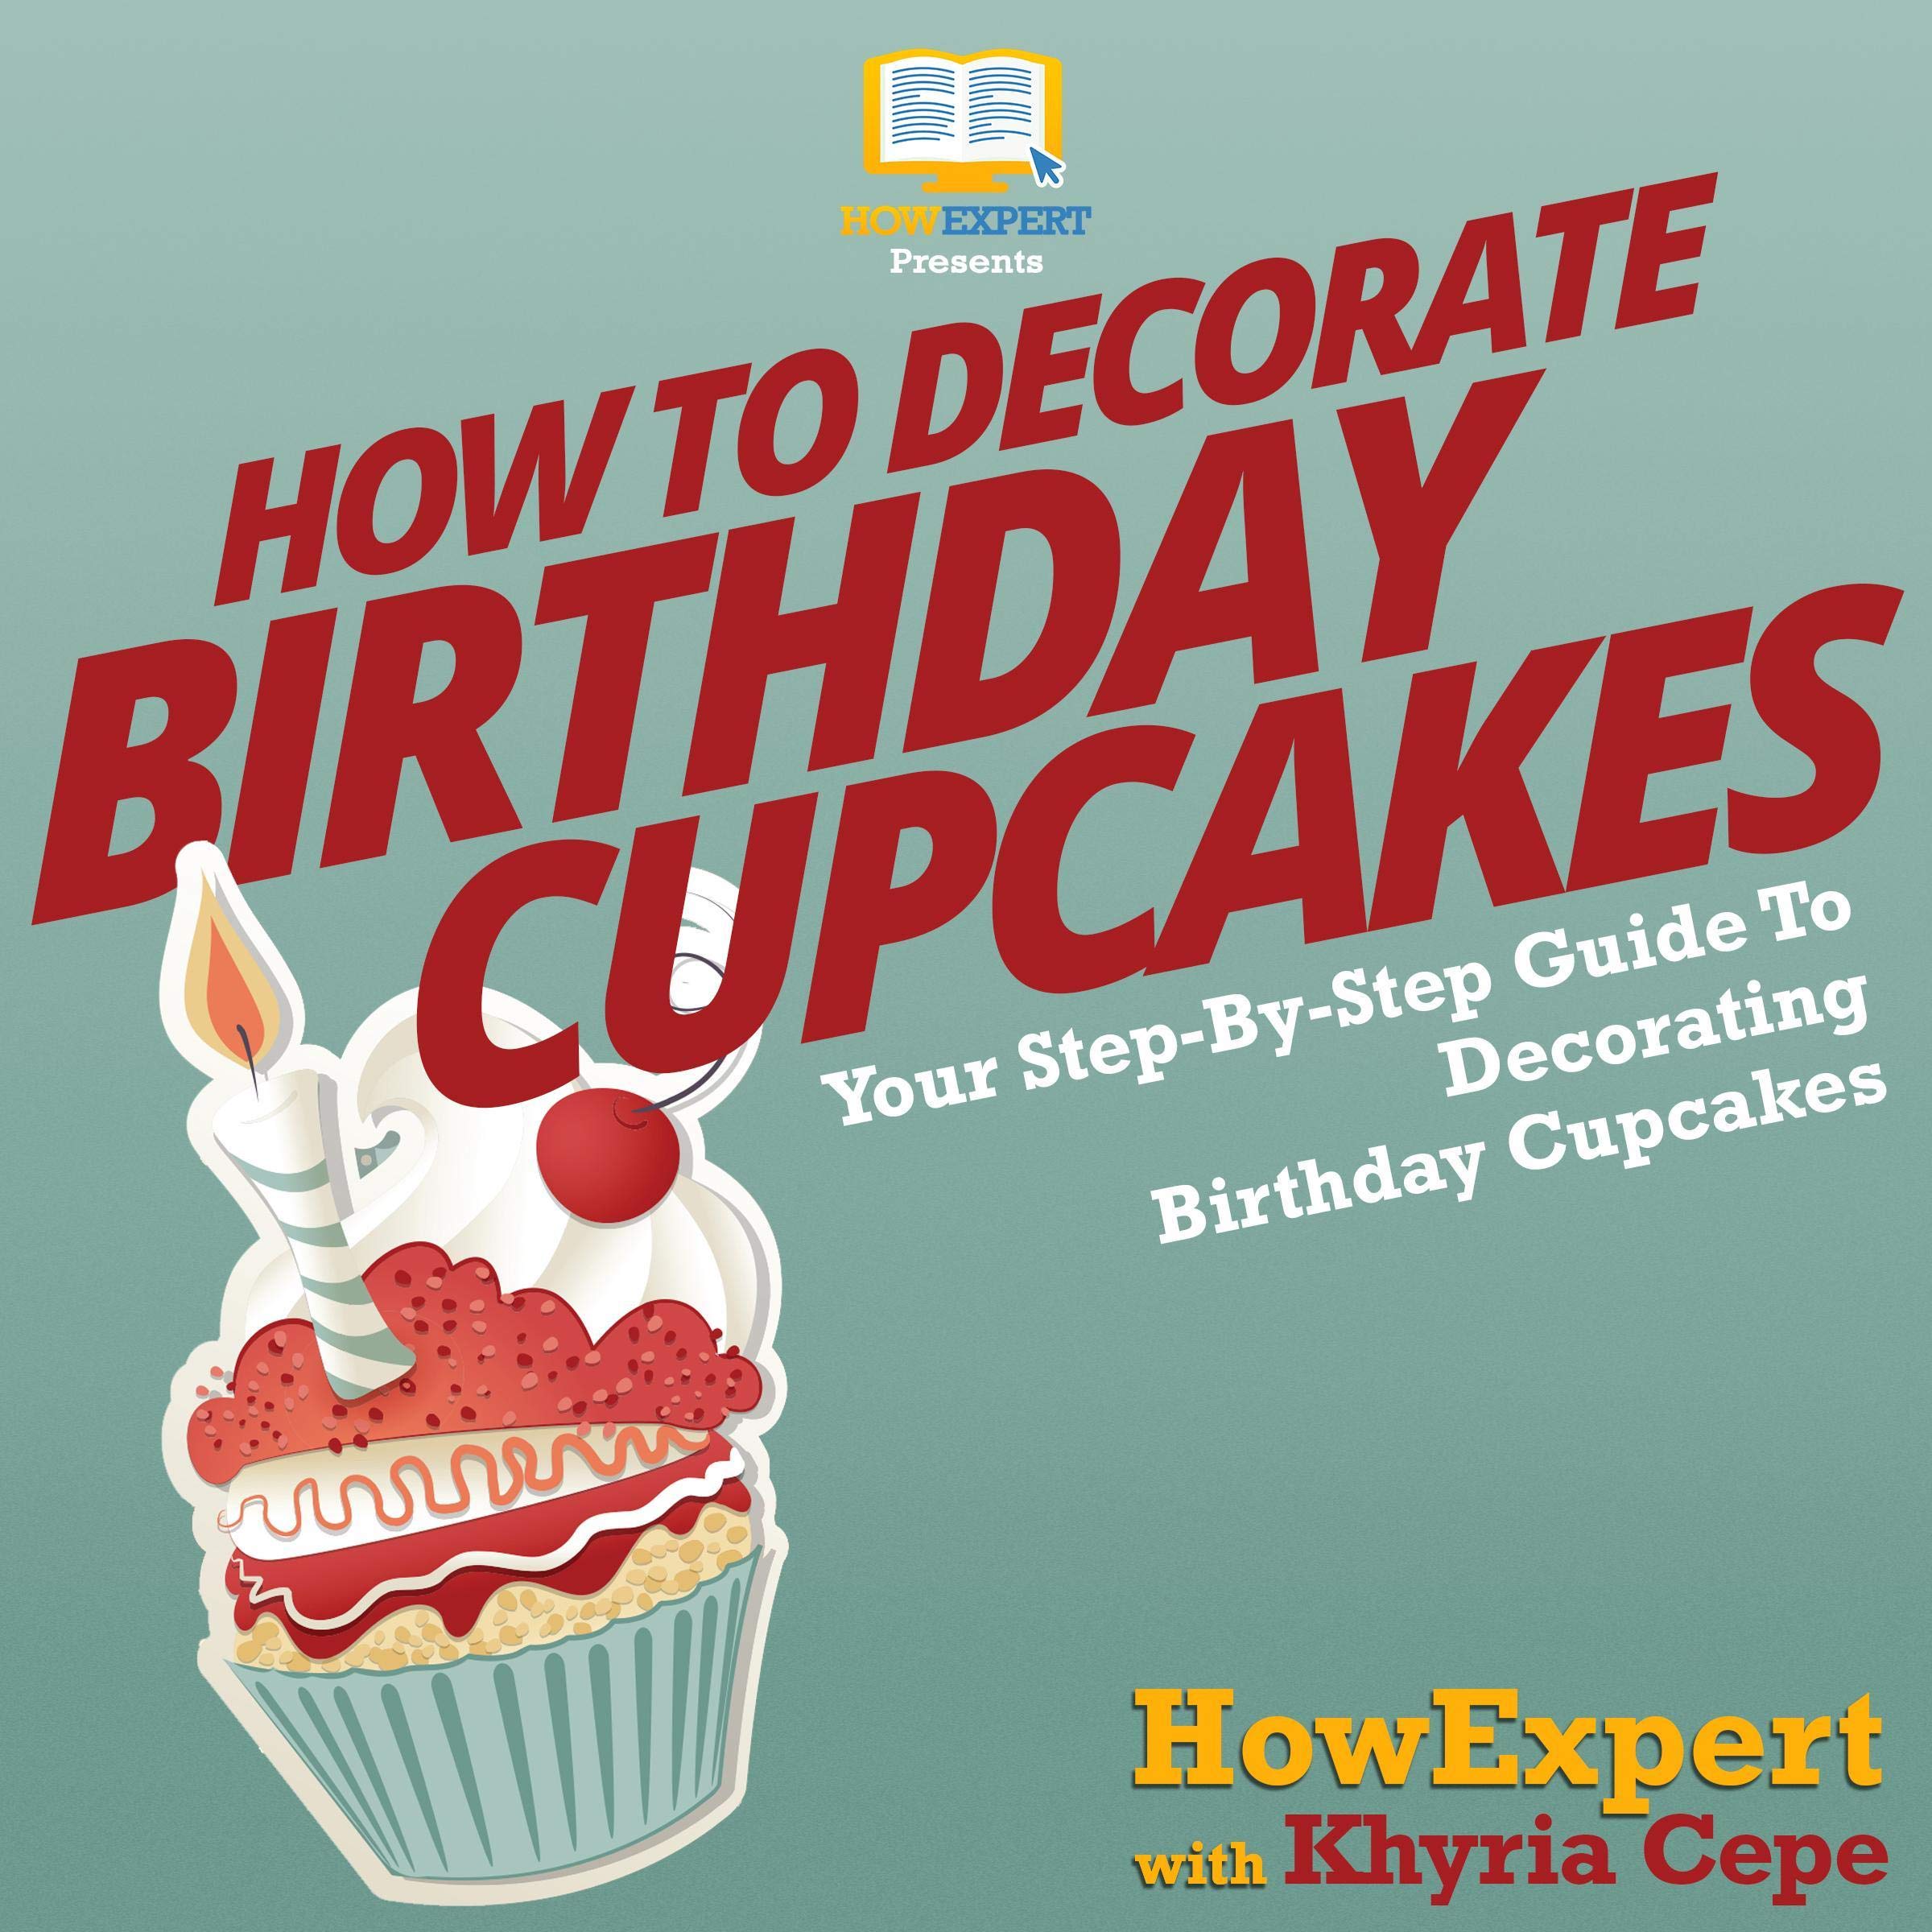 How to Decorate Birthday Cupcakes - Your Step-by-Step Guide to Decorating Birthday Cupcakes